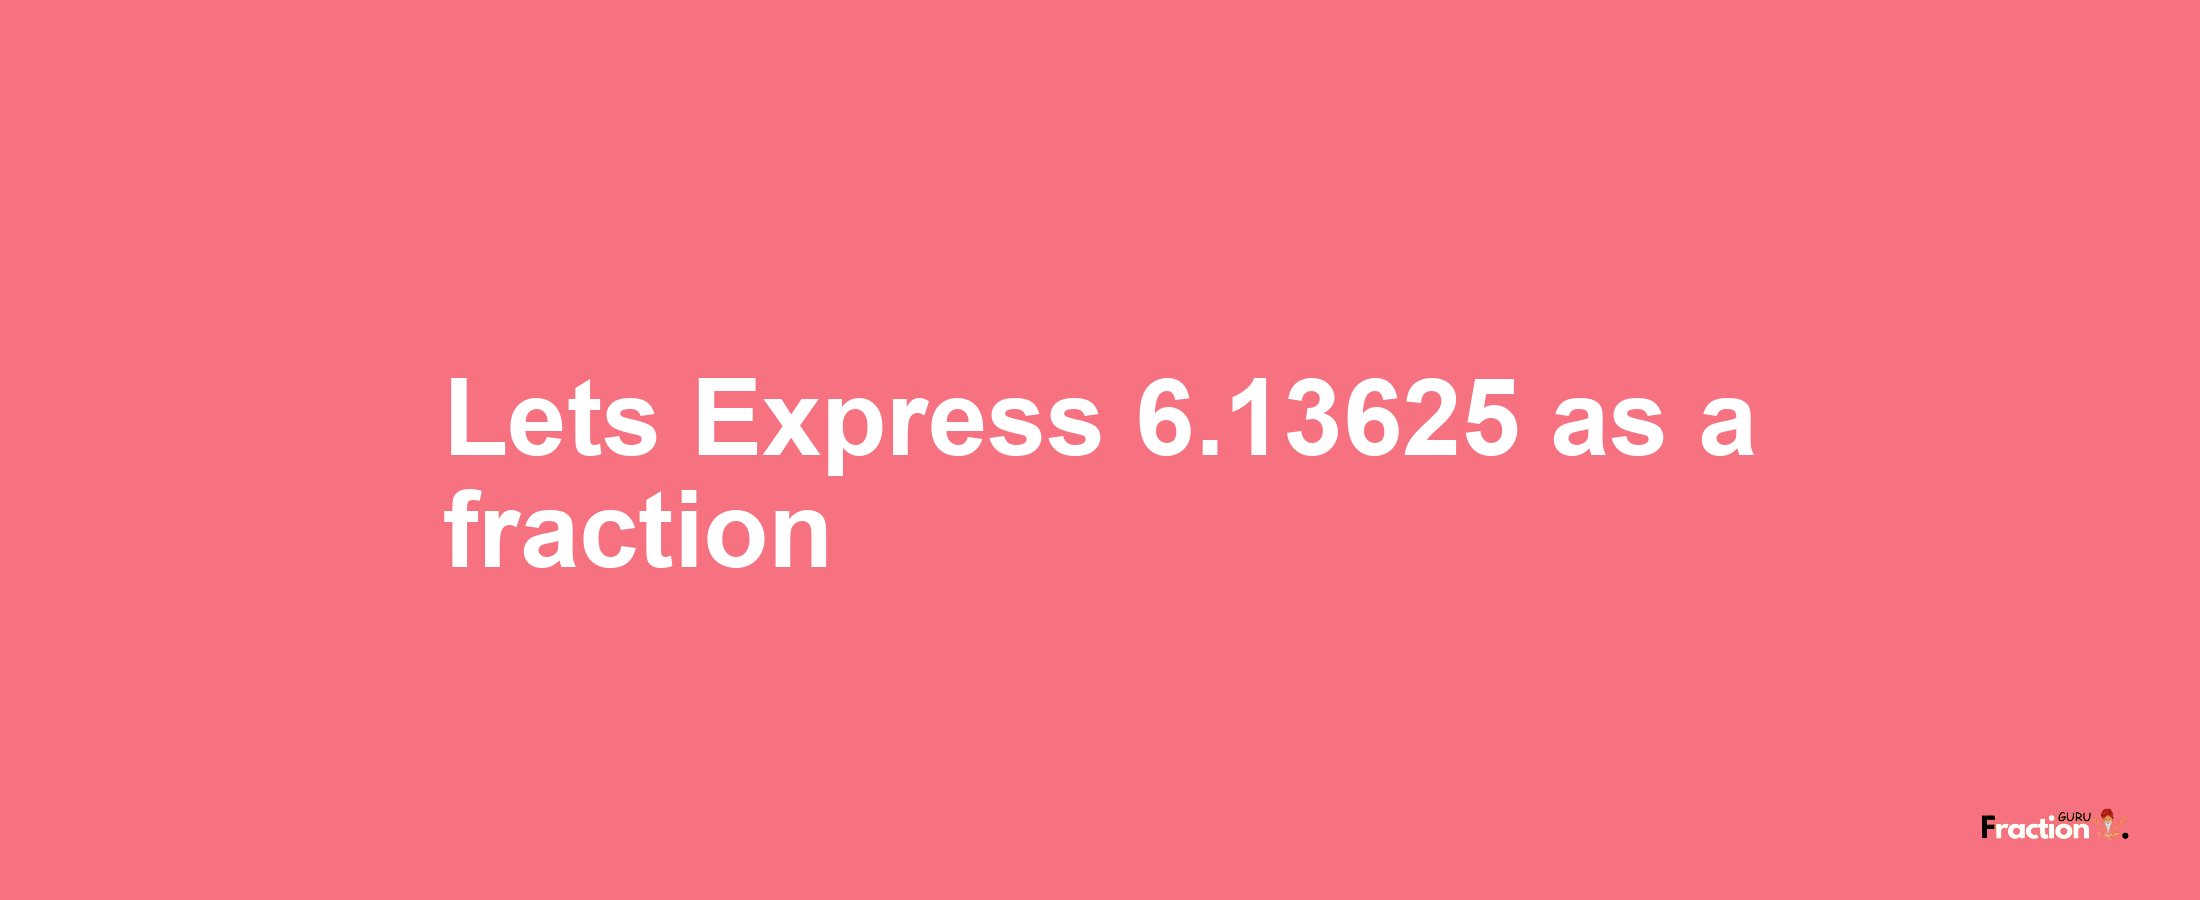 Lets Express 6.13625 as afraction